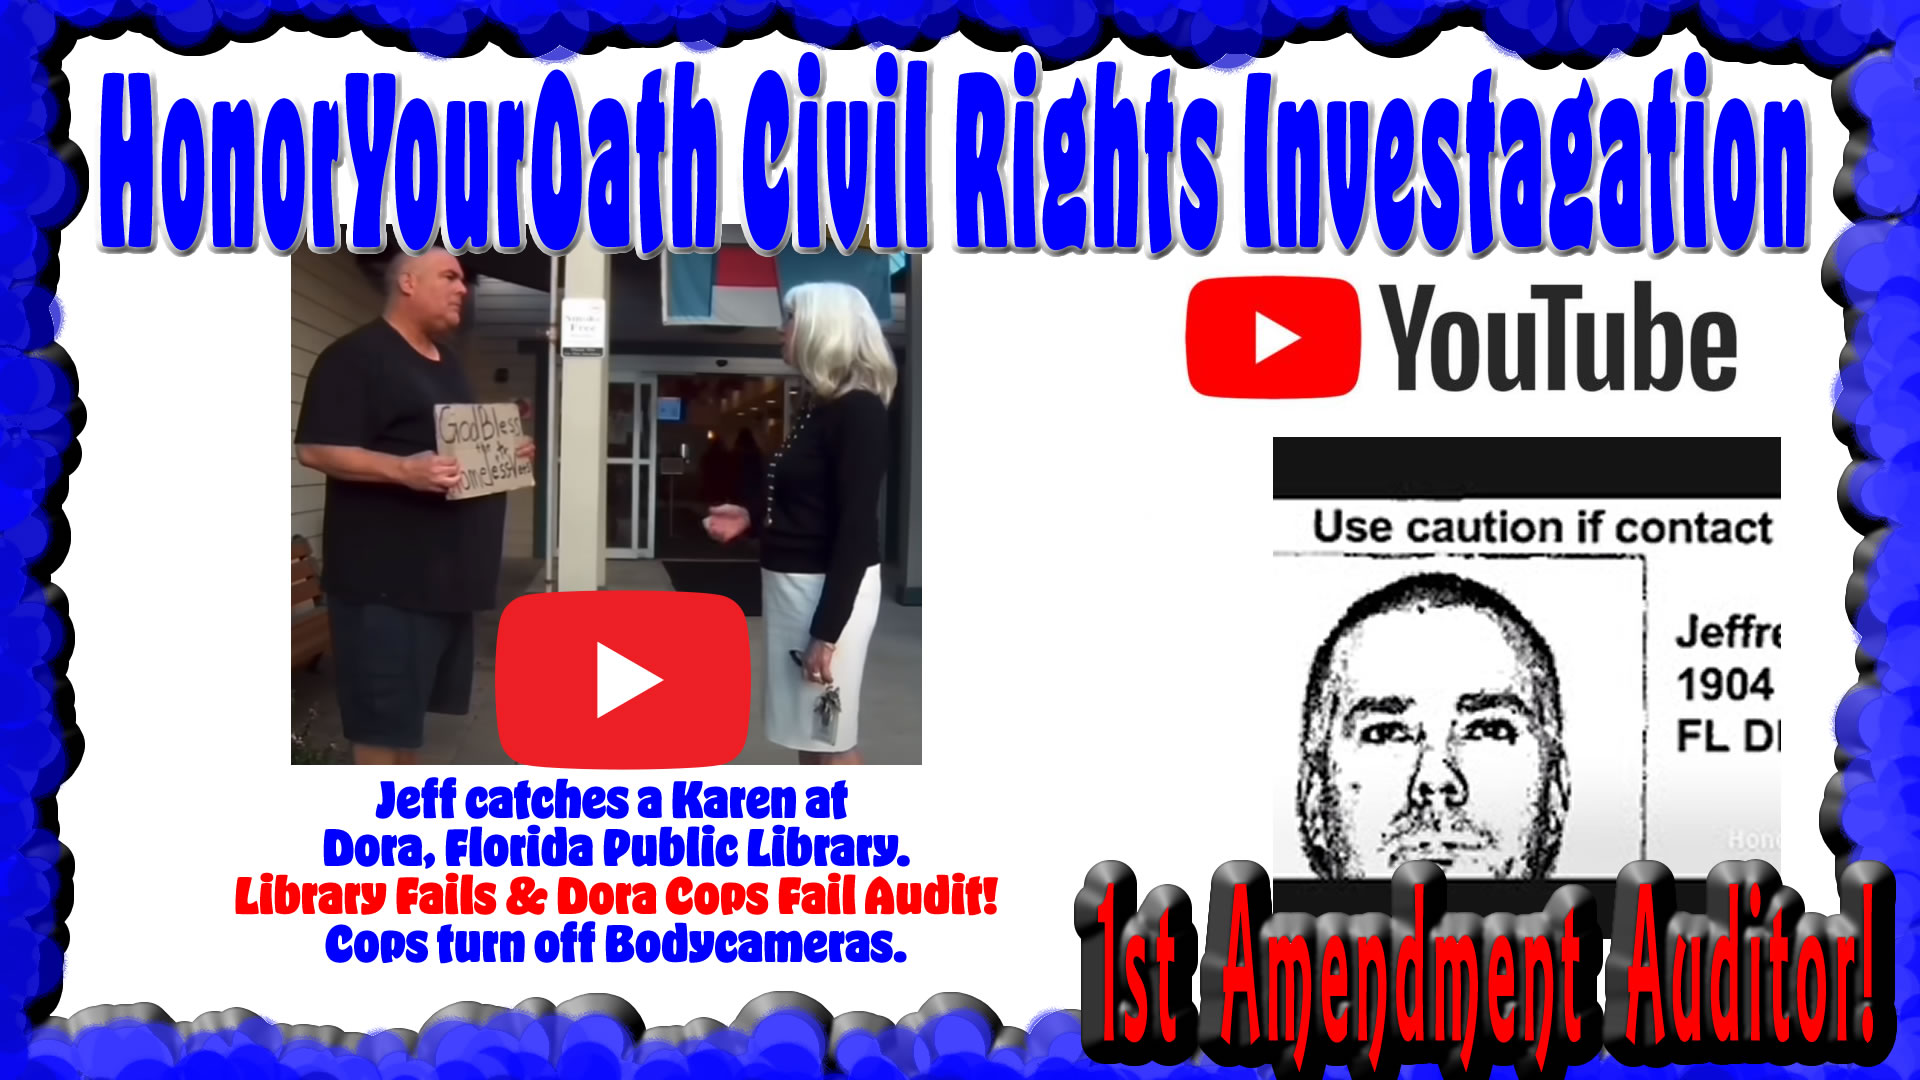 HonorYourOath Civil Rights Investagation exposes Tryrants in Dora Florida.